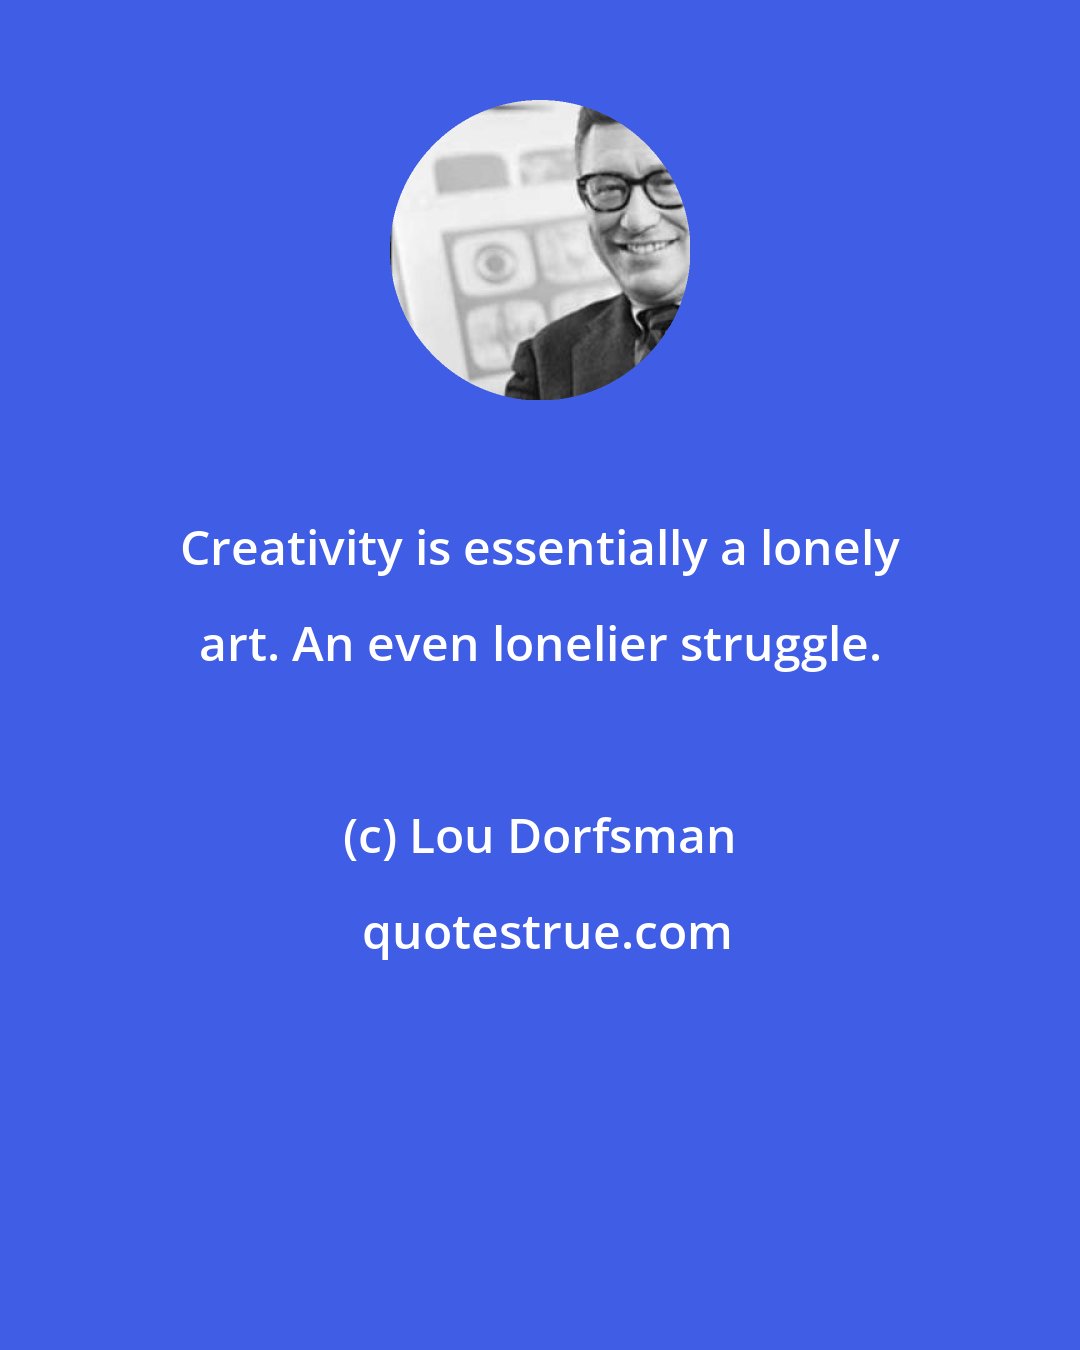 Lou Dorfsman: Creativity is essentially a lonely art. An even lonelier struggle.